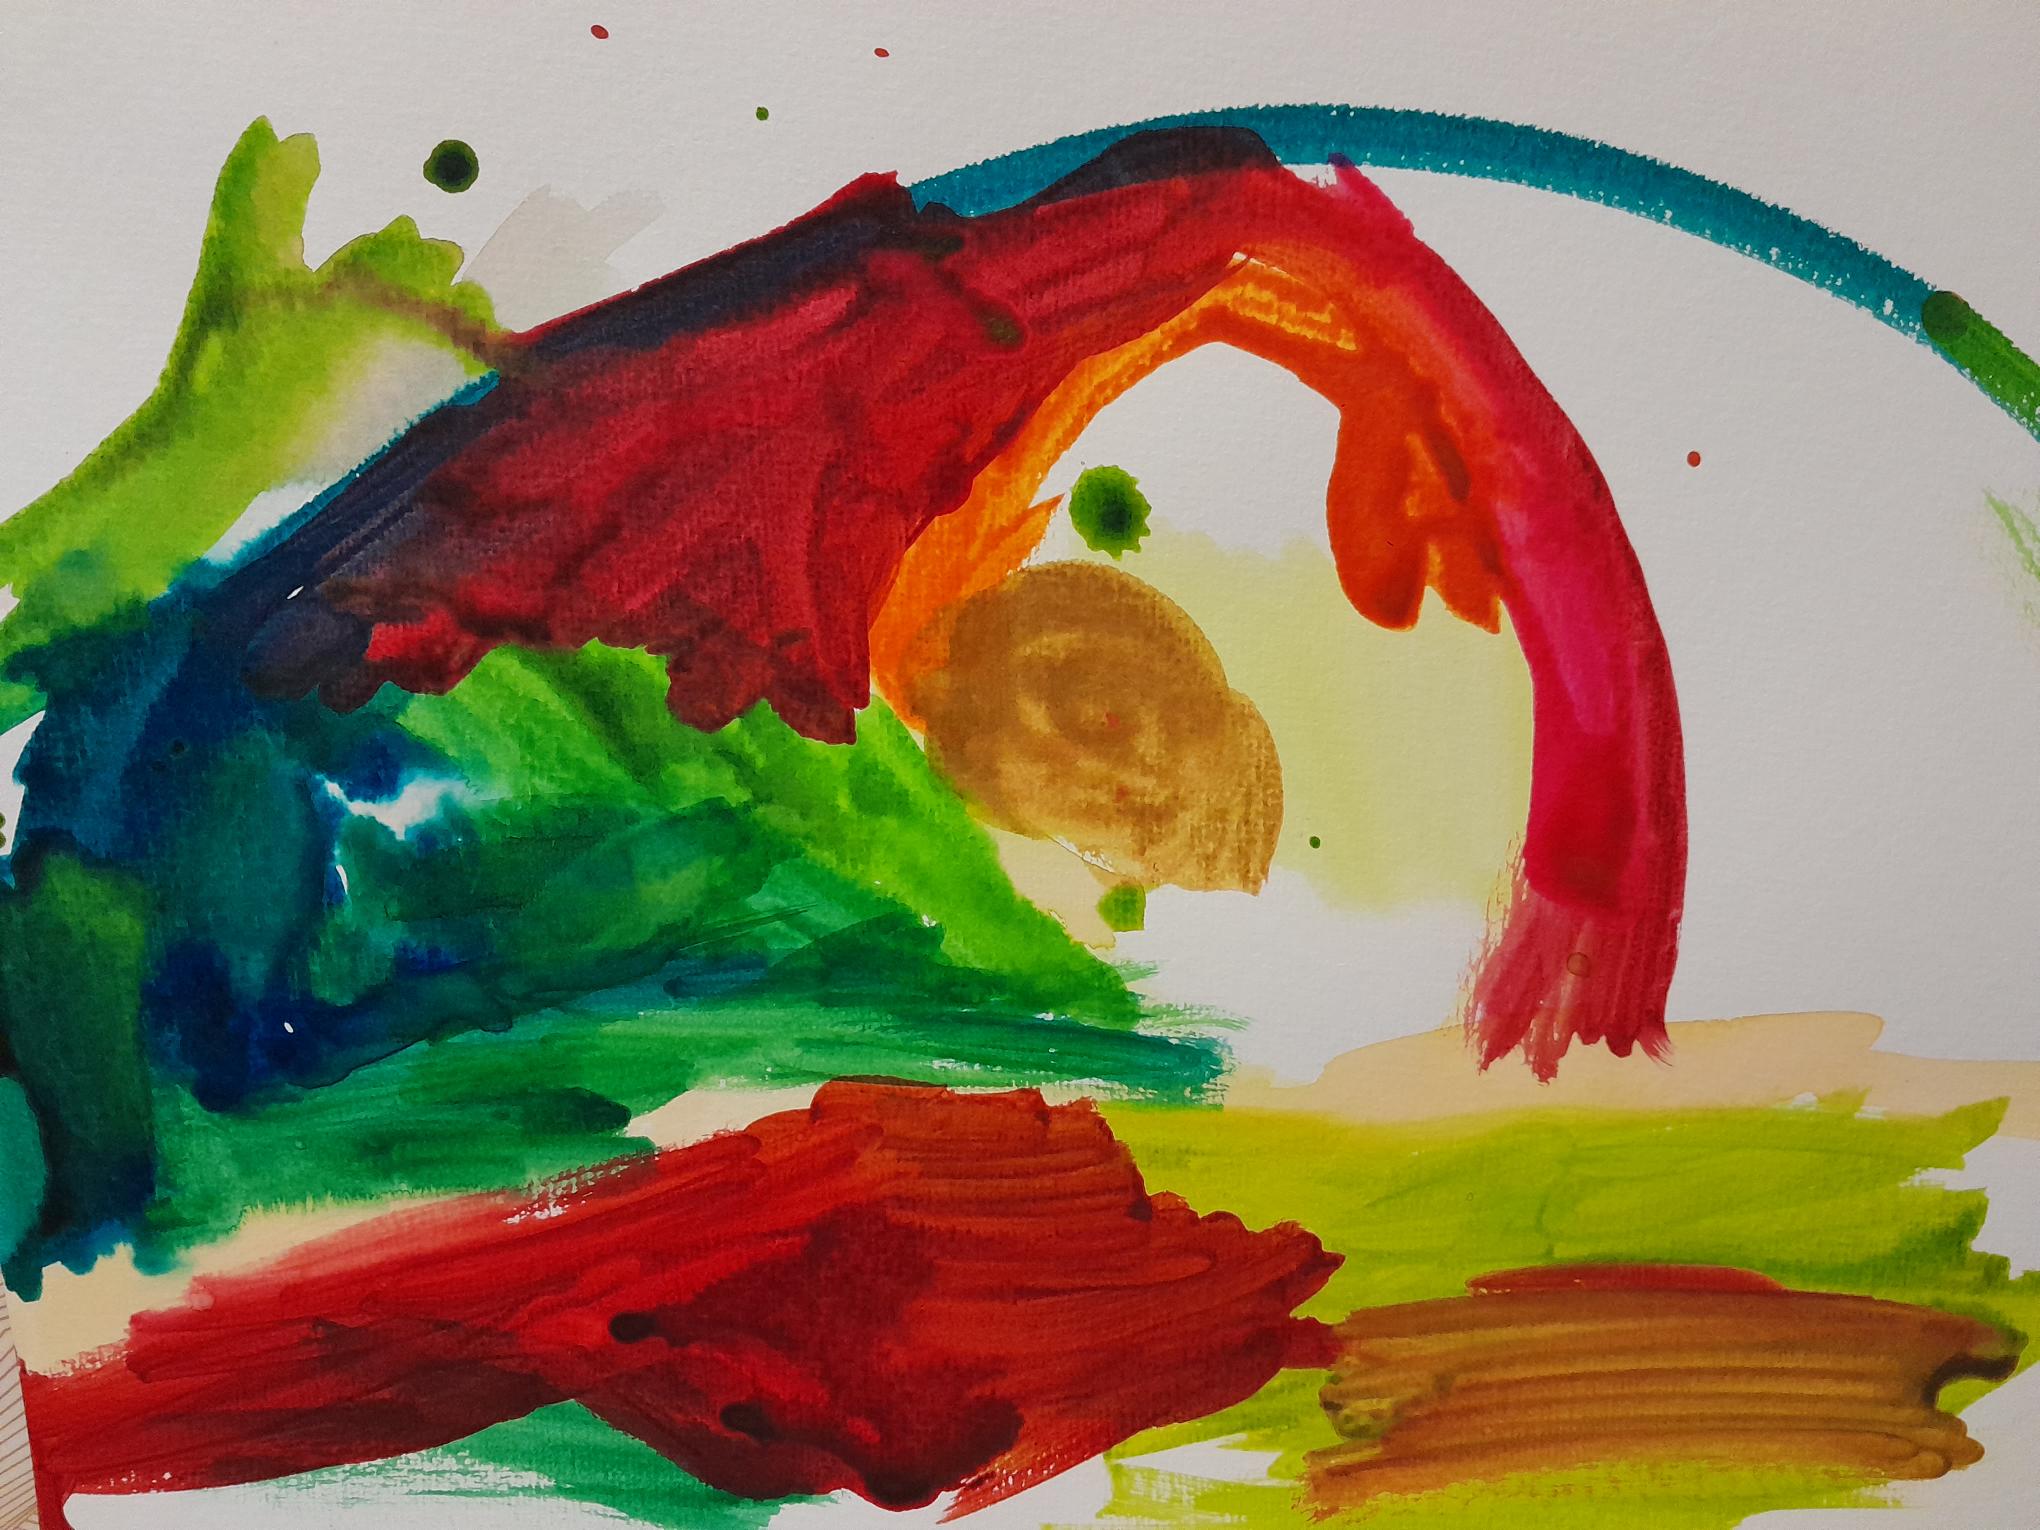 A colourful abstract painting of monsters and dinosaurs in the park